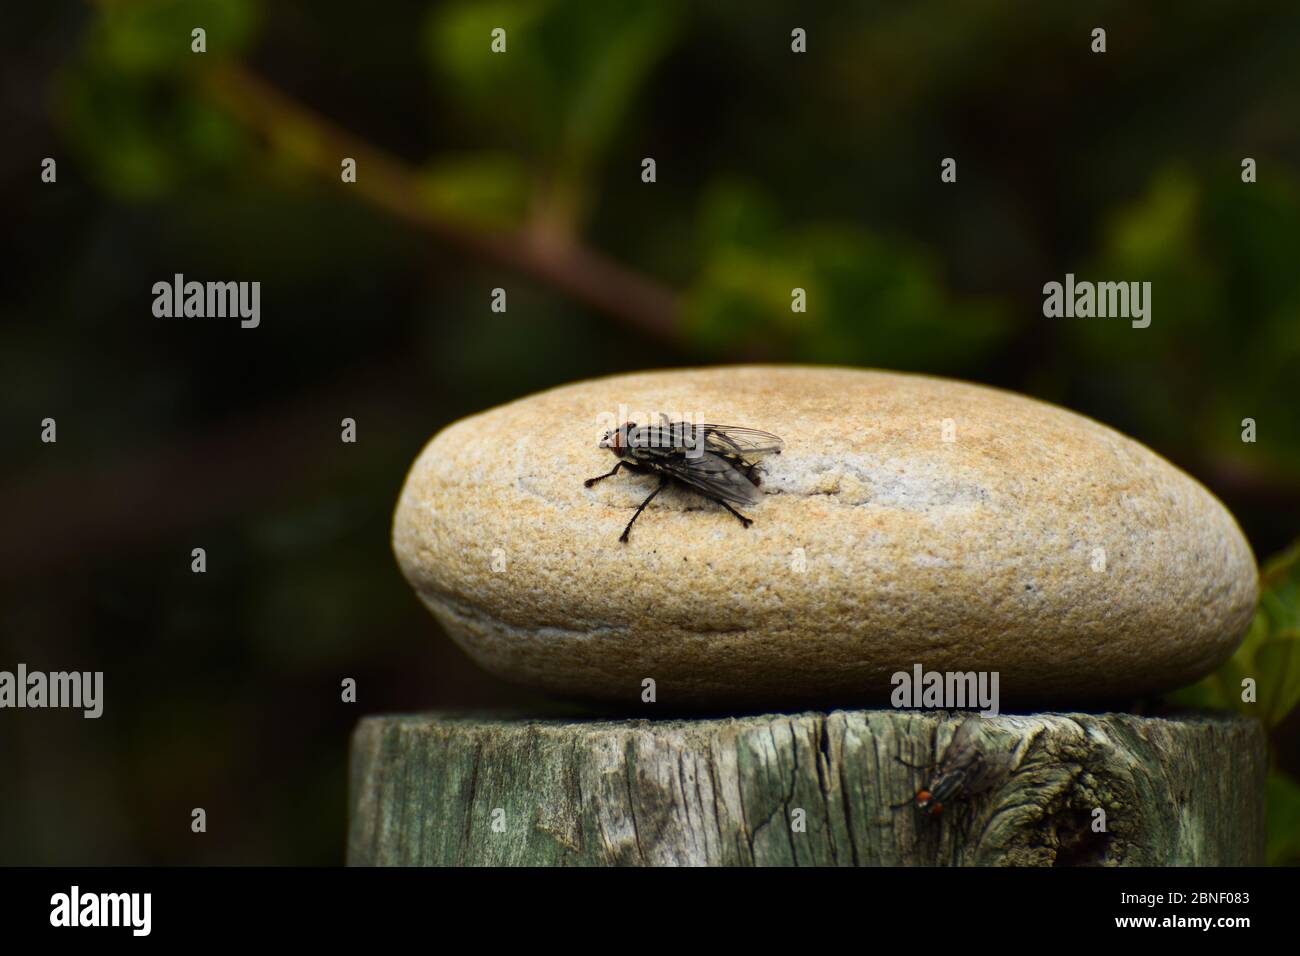 Large Housefly Isolated On Rock (Musca domestica) Stock Photo